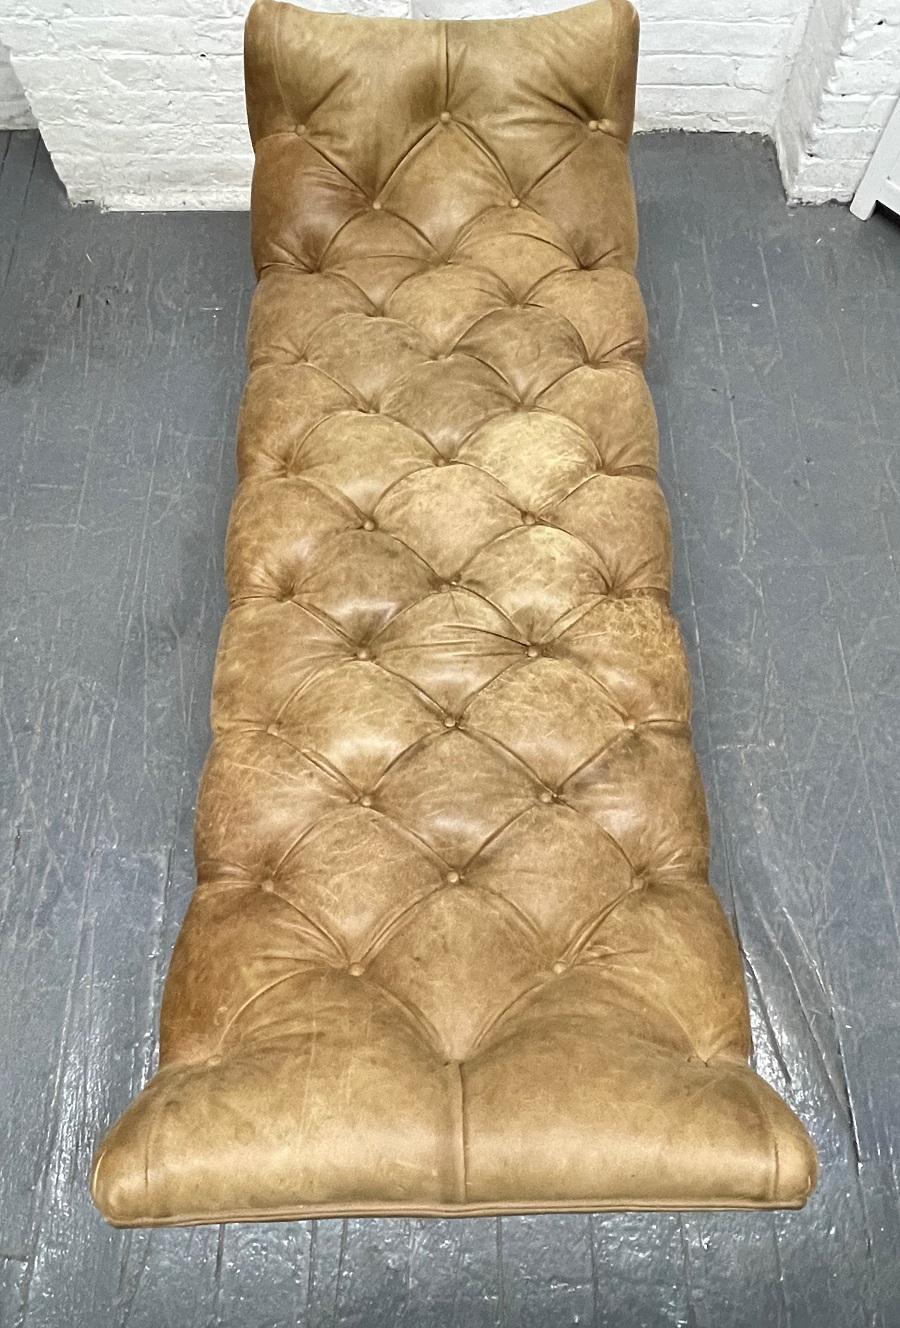 Late 20th Century English Leather Tufted Bench